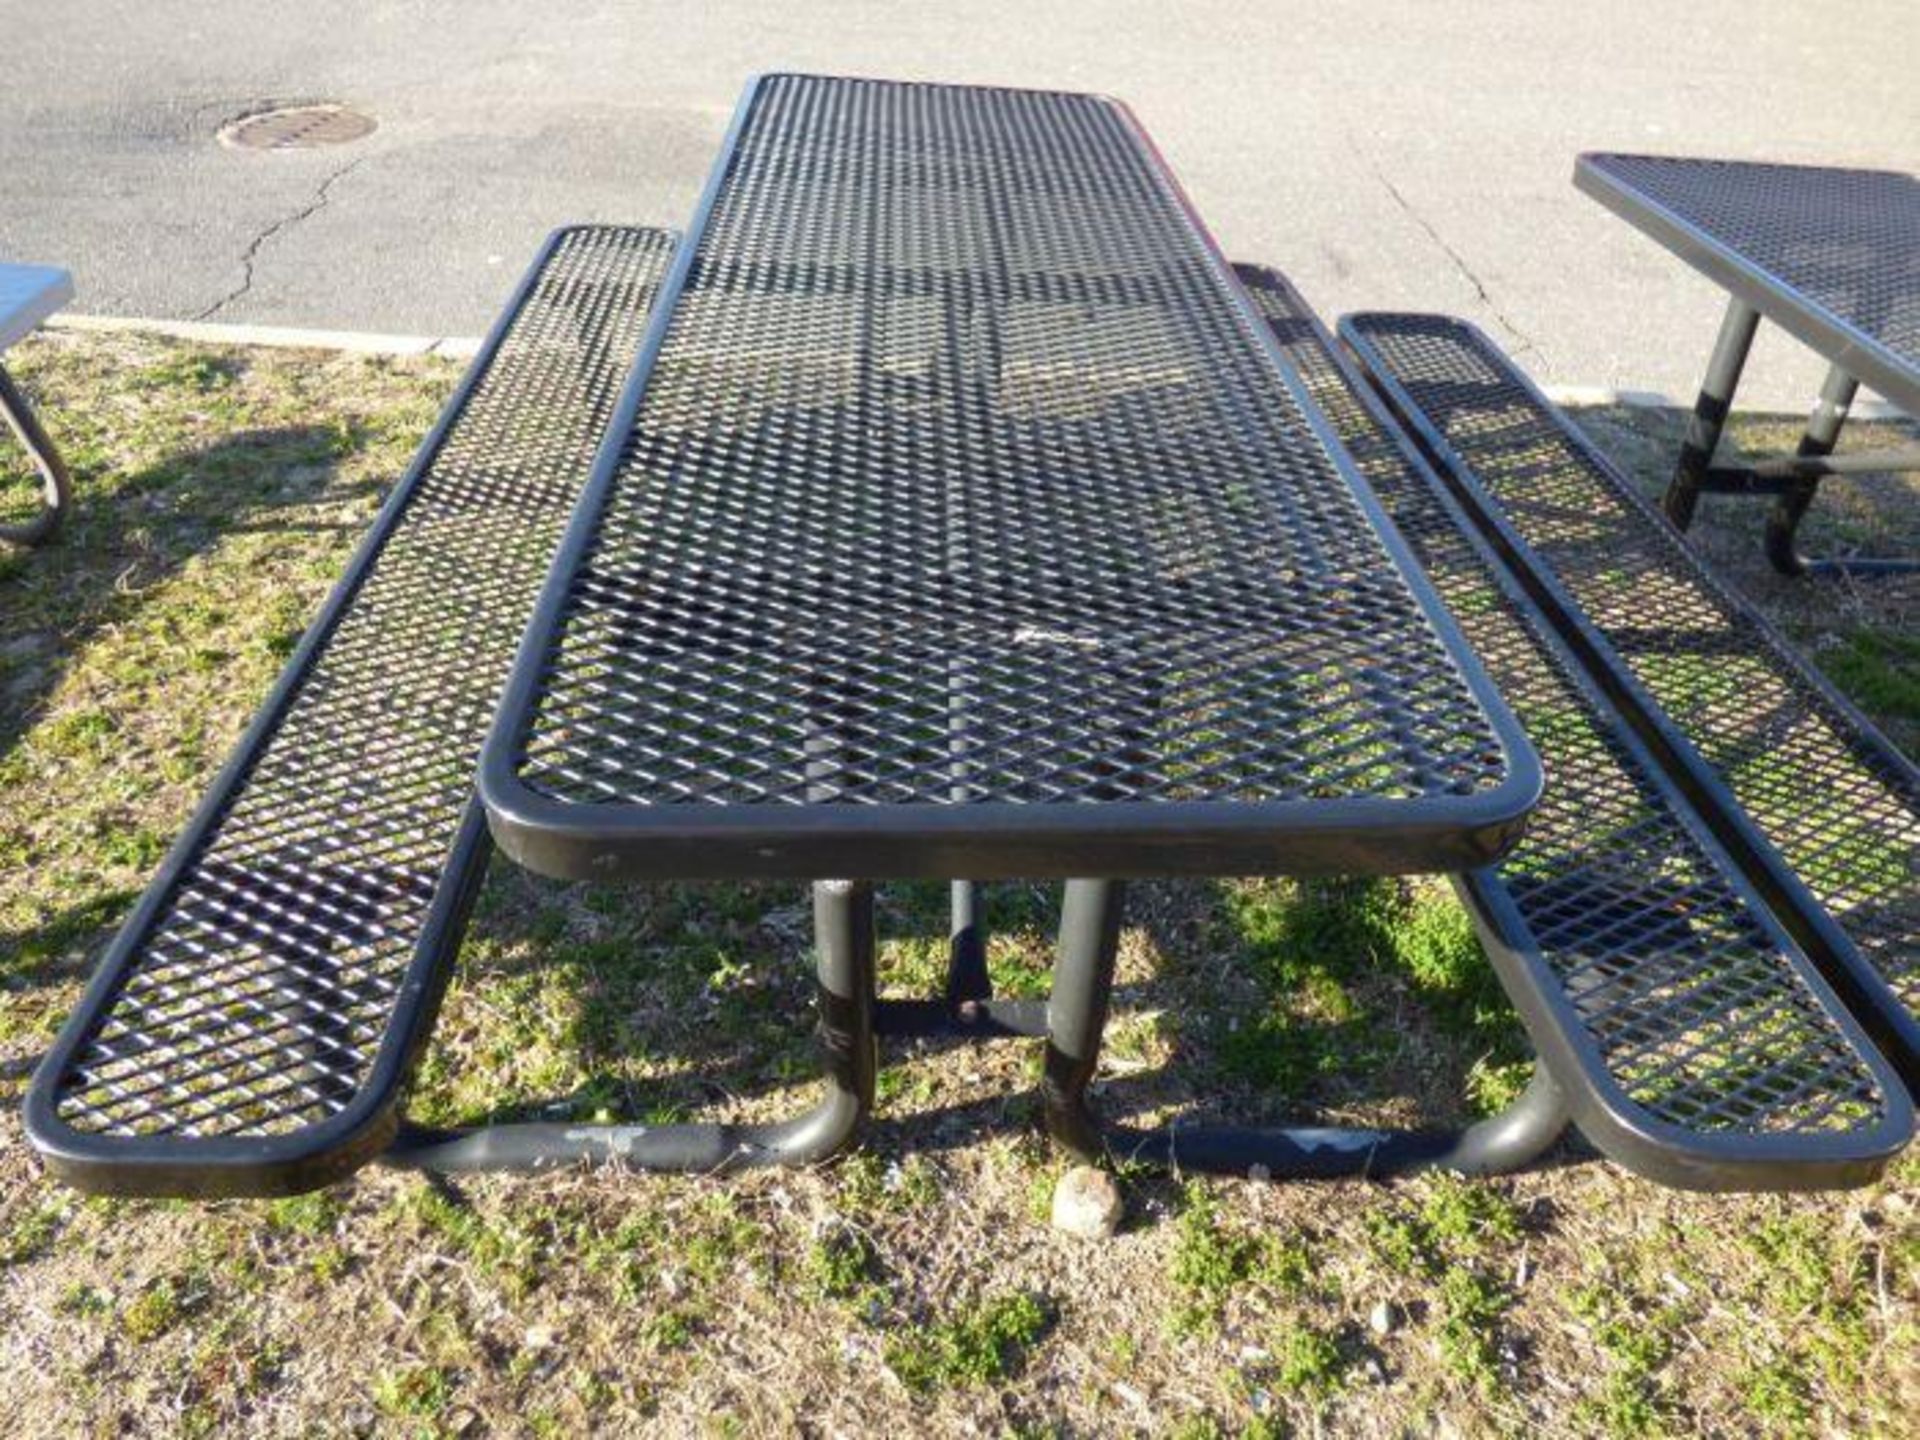 Commercial Picnic Tables - Image 7 of 8